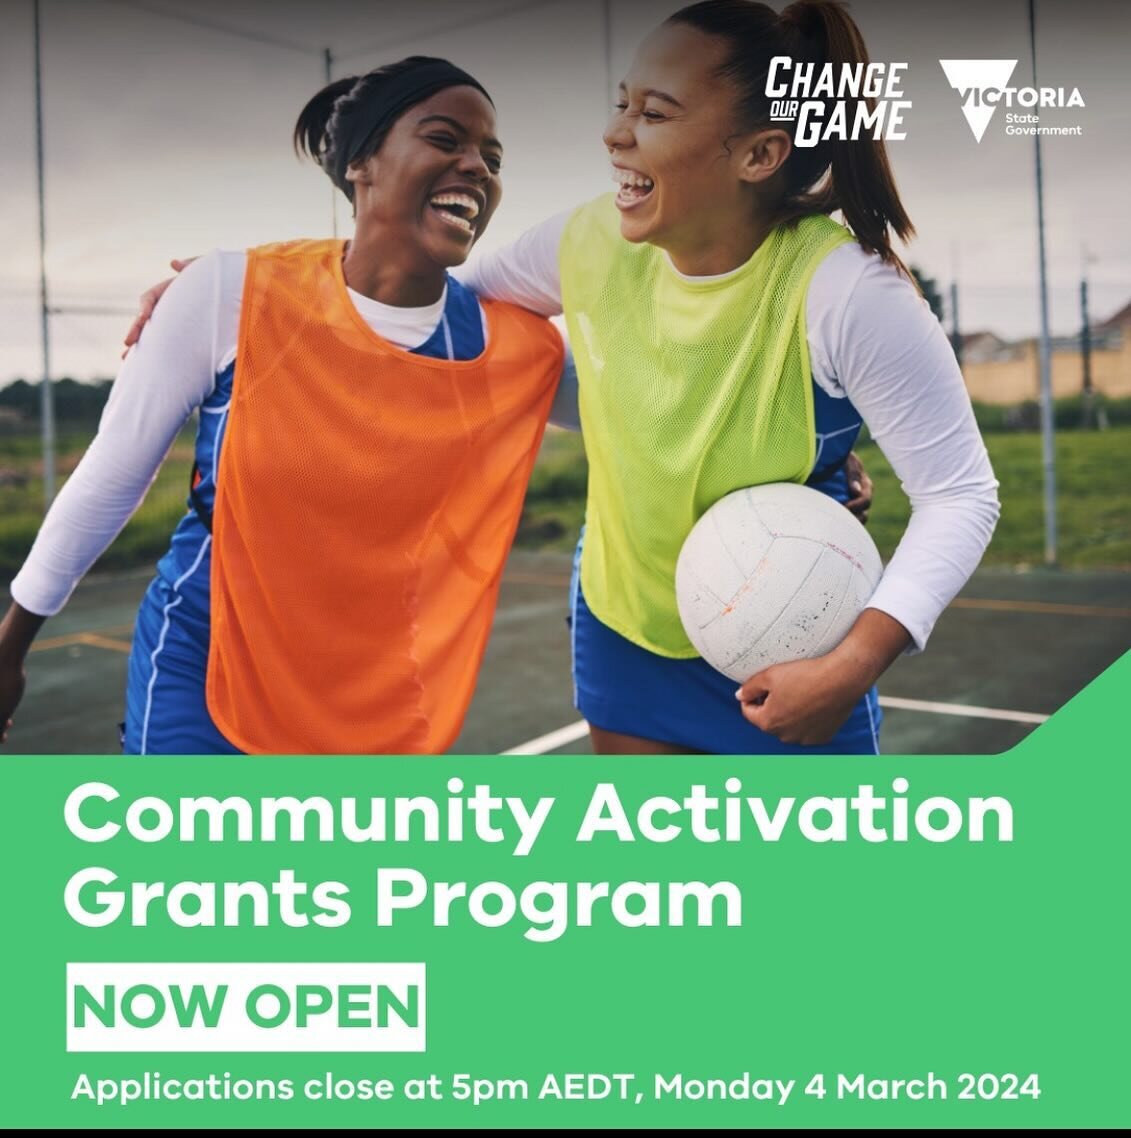 The 2023-2024 Change Our Game Activation Grants Program is NOW OPEN ! 
Grants offered through the Officw for Women in Sport and Rec the program provides up to $10,000 to deliver activities that increase participation , build capability and celebrate 